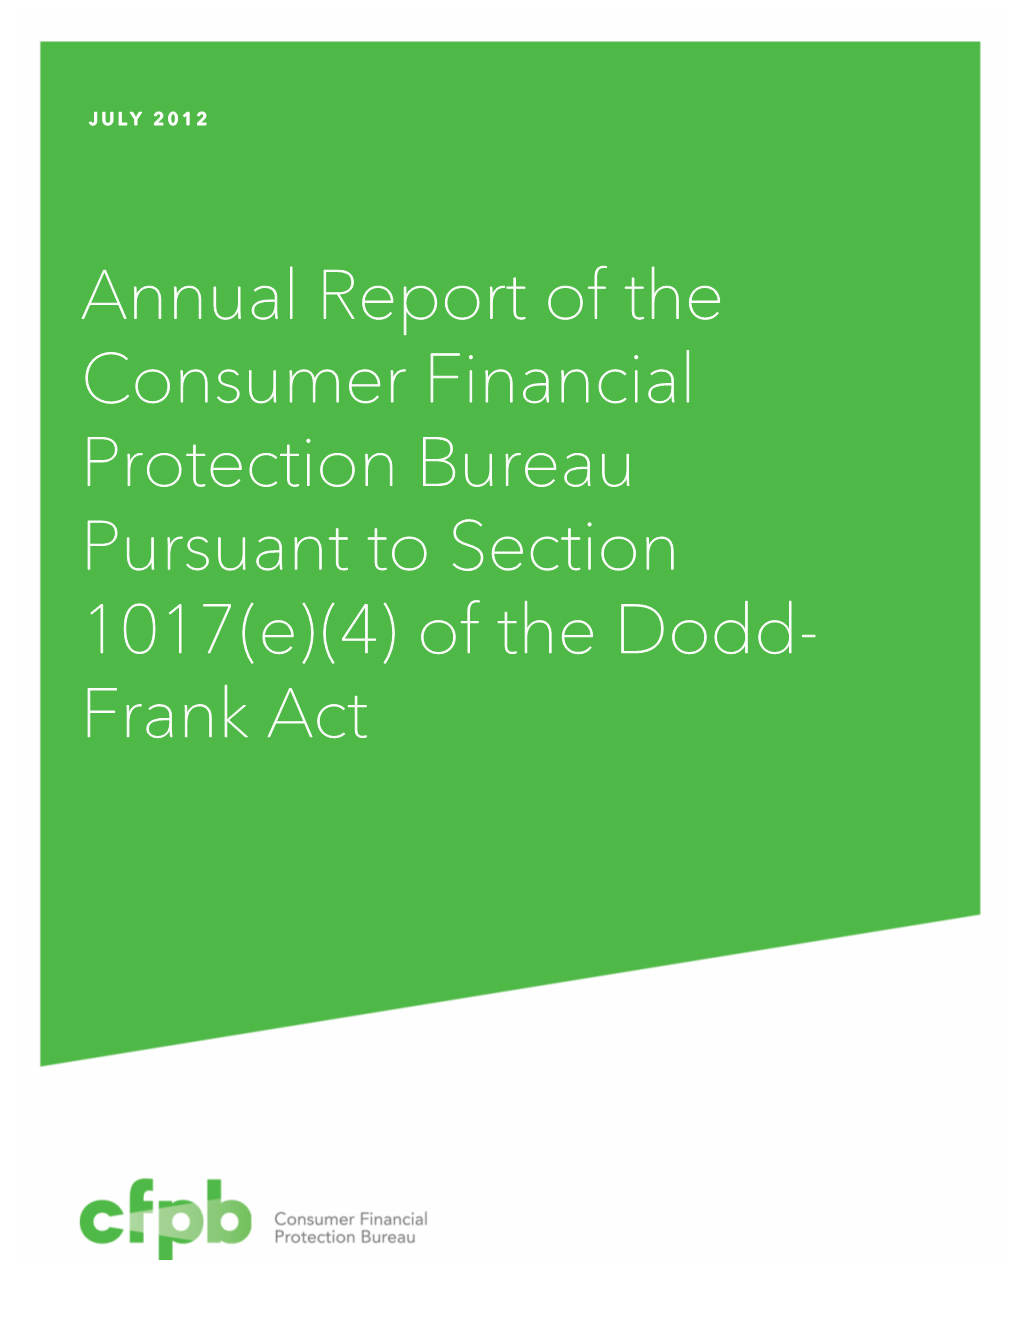 Annual Appropriations Report Pursuant to Section 1017(E)(4) of the Dodd